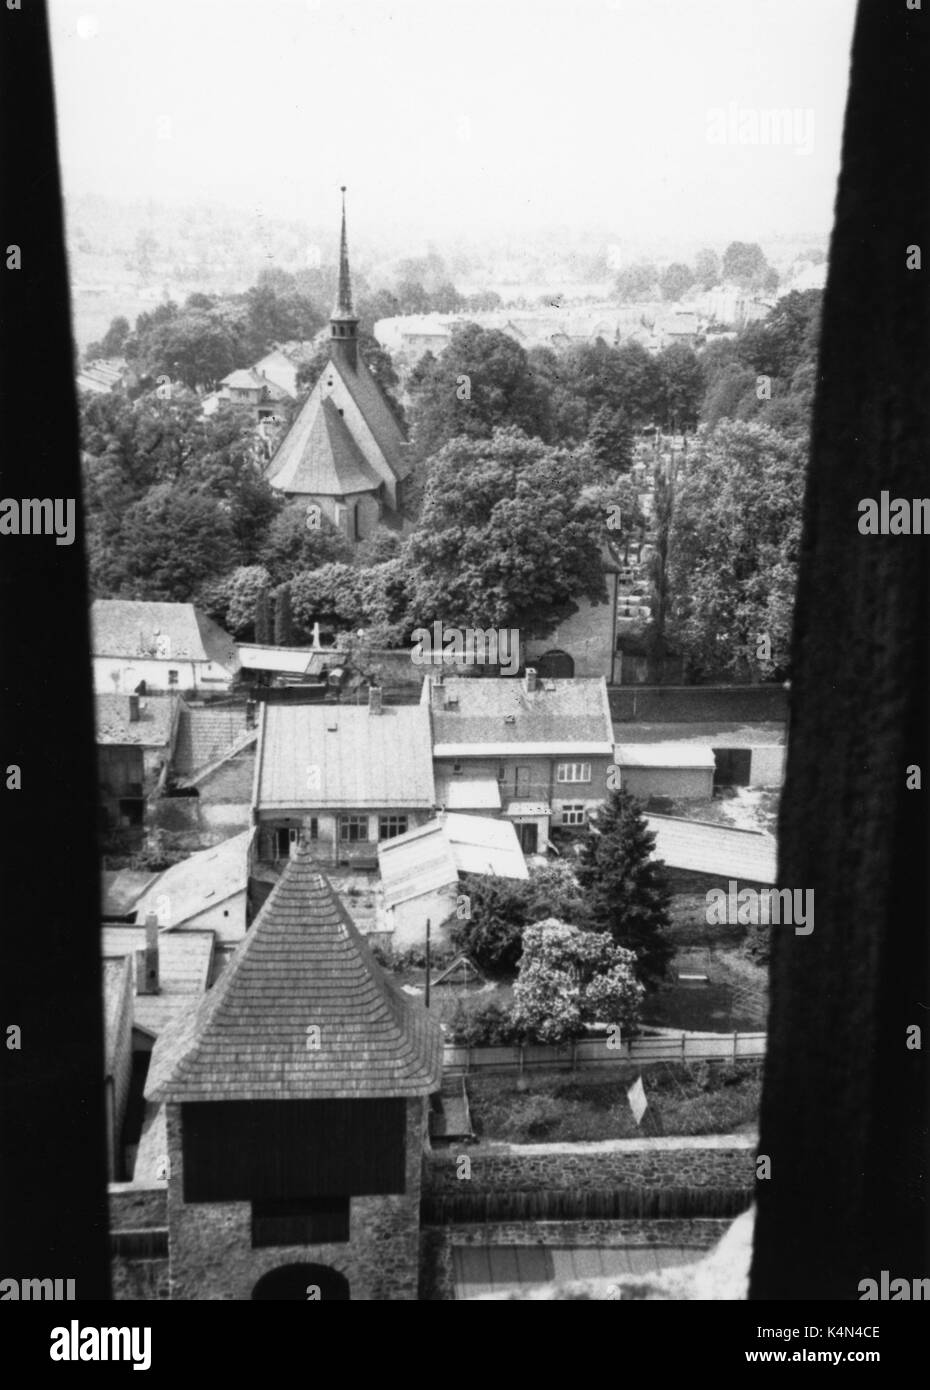 Bohuslav Martinu - View from the tower of St. James' Church in Policka where he was born and spent his childhood. The family lived in the tower as his father worked as a bell-ringer and town watchman. BM: Czech composer, b. December 8, 1890 – August 28, 1959. Stock Photo